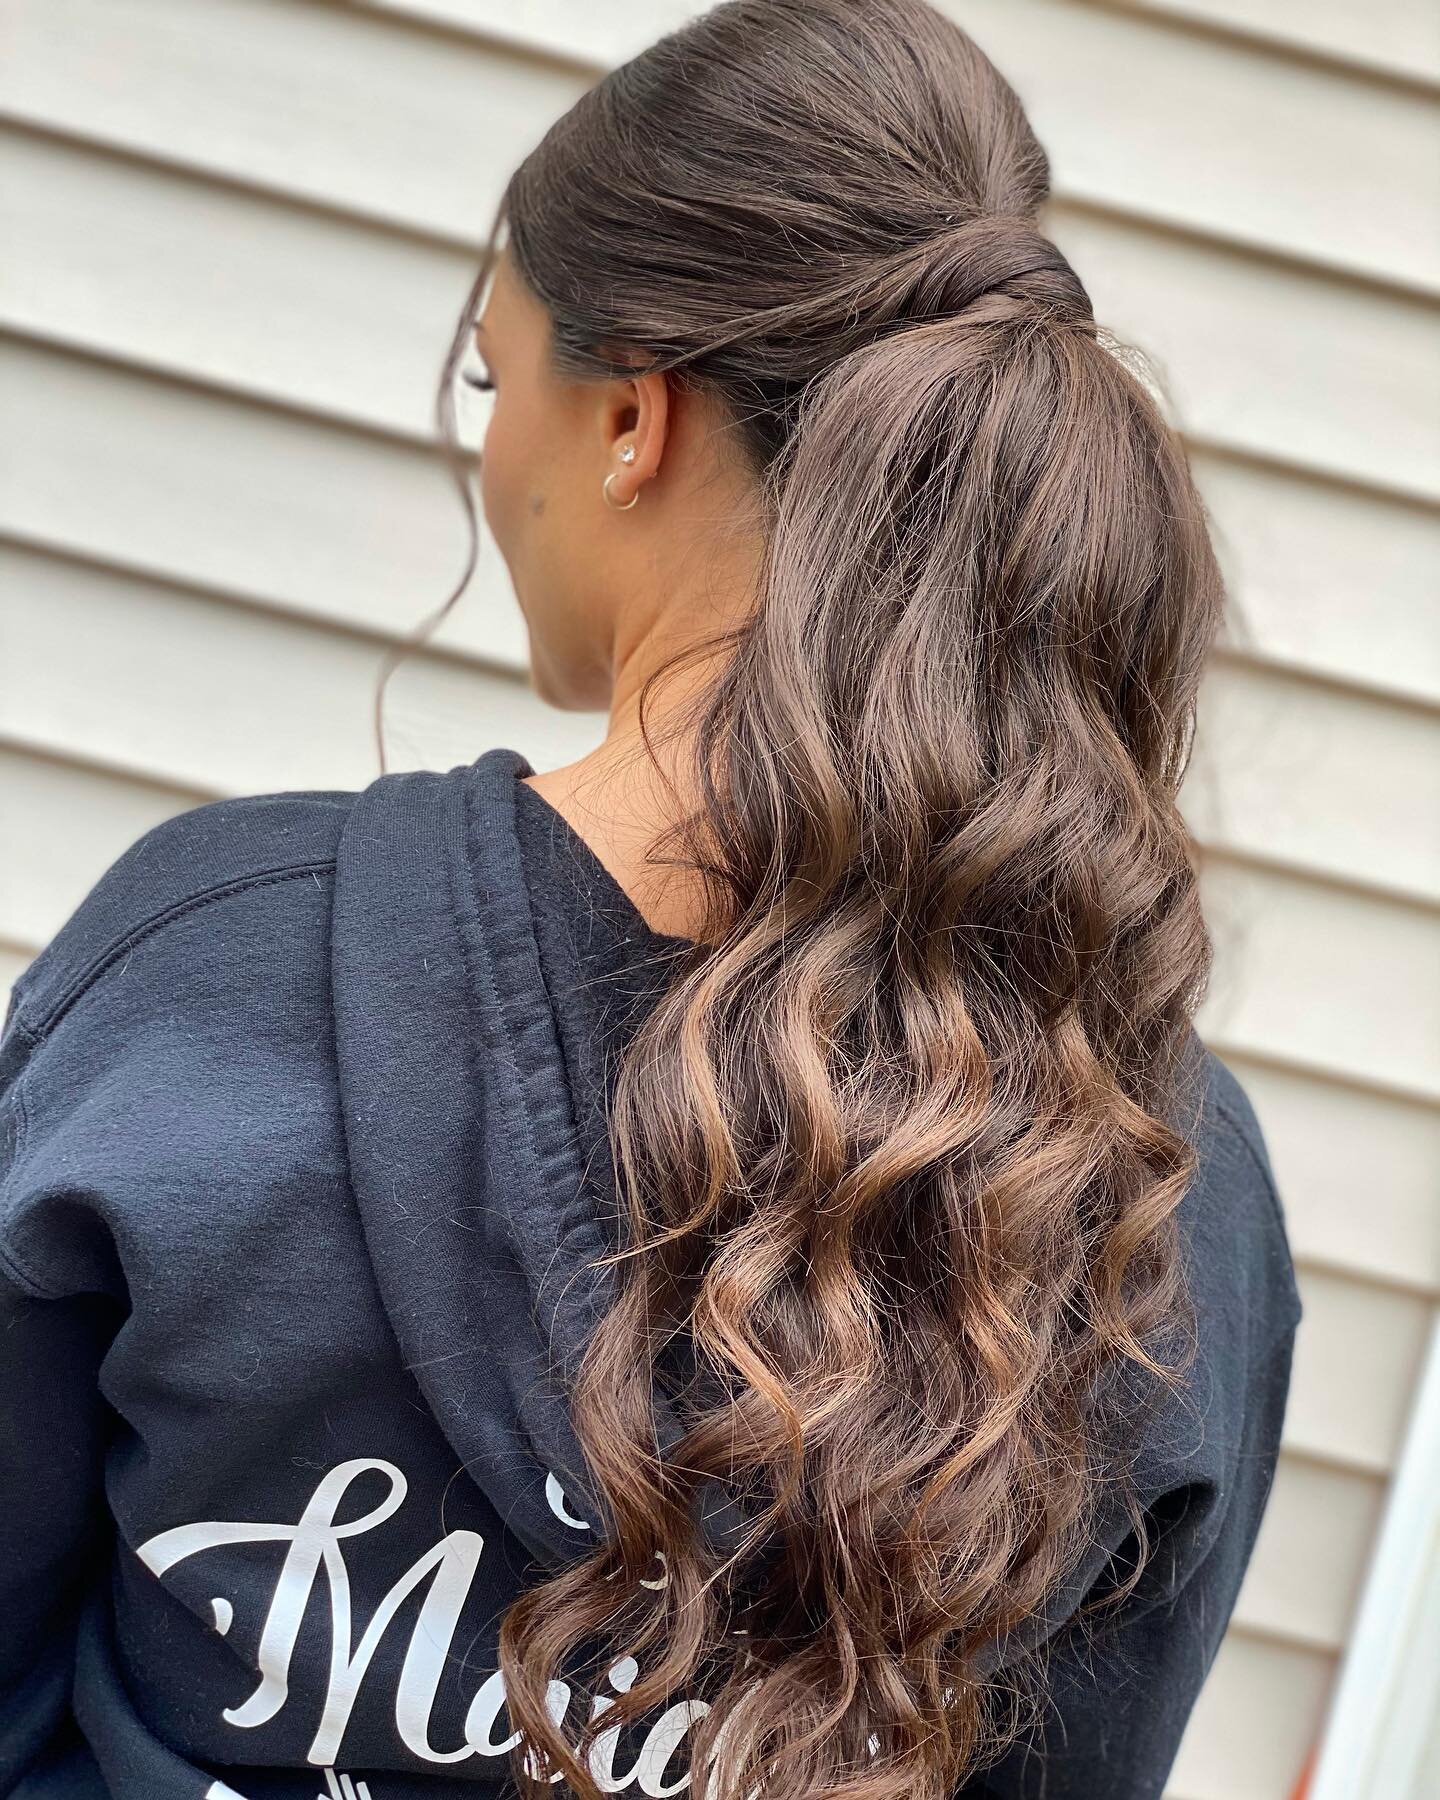 🖤🖤🖤
✨C O N T A C T✨
For bookings, inquiries &amp; all other info
💌VMbeautyy@gmail.com
.
.
.
.
.
.
#hair #hairextentions #tapeins #wedding #bride #bridal #monmouthcounty #middlesexcounty #professional #newjersey #newyork #volume #njhair #color #co